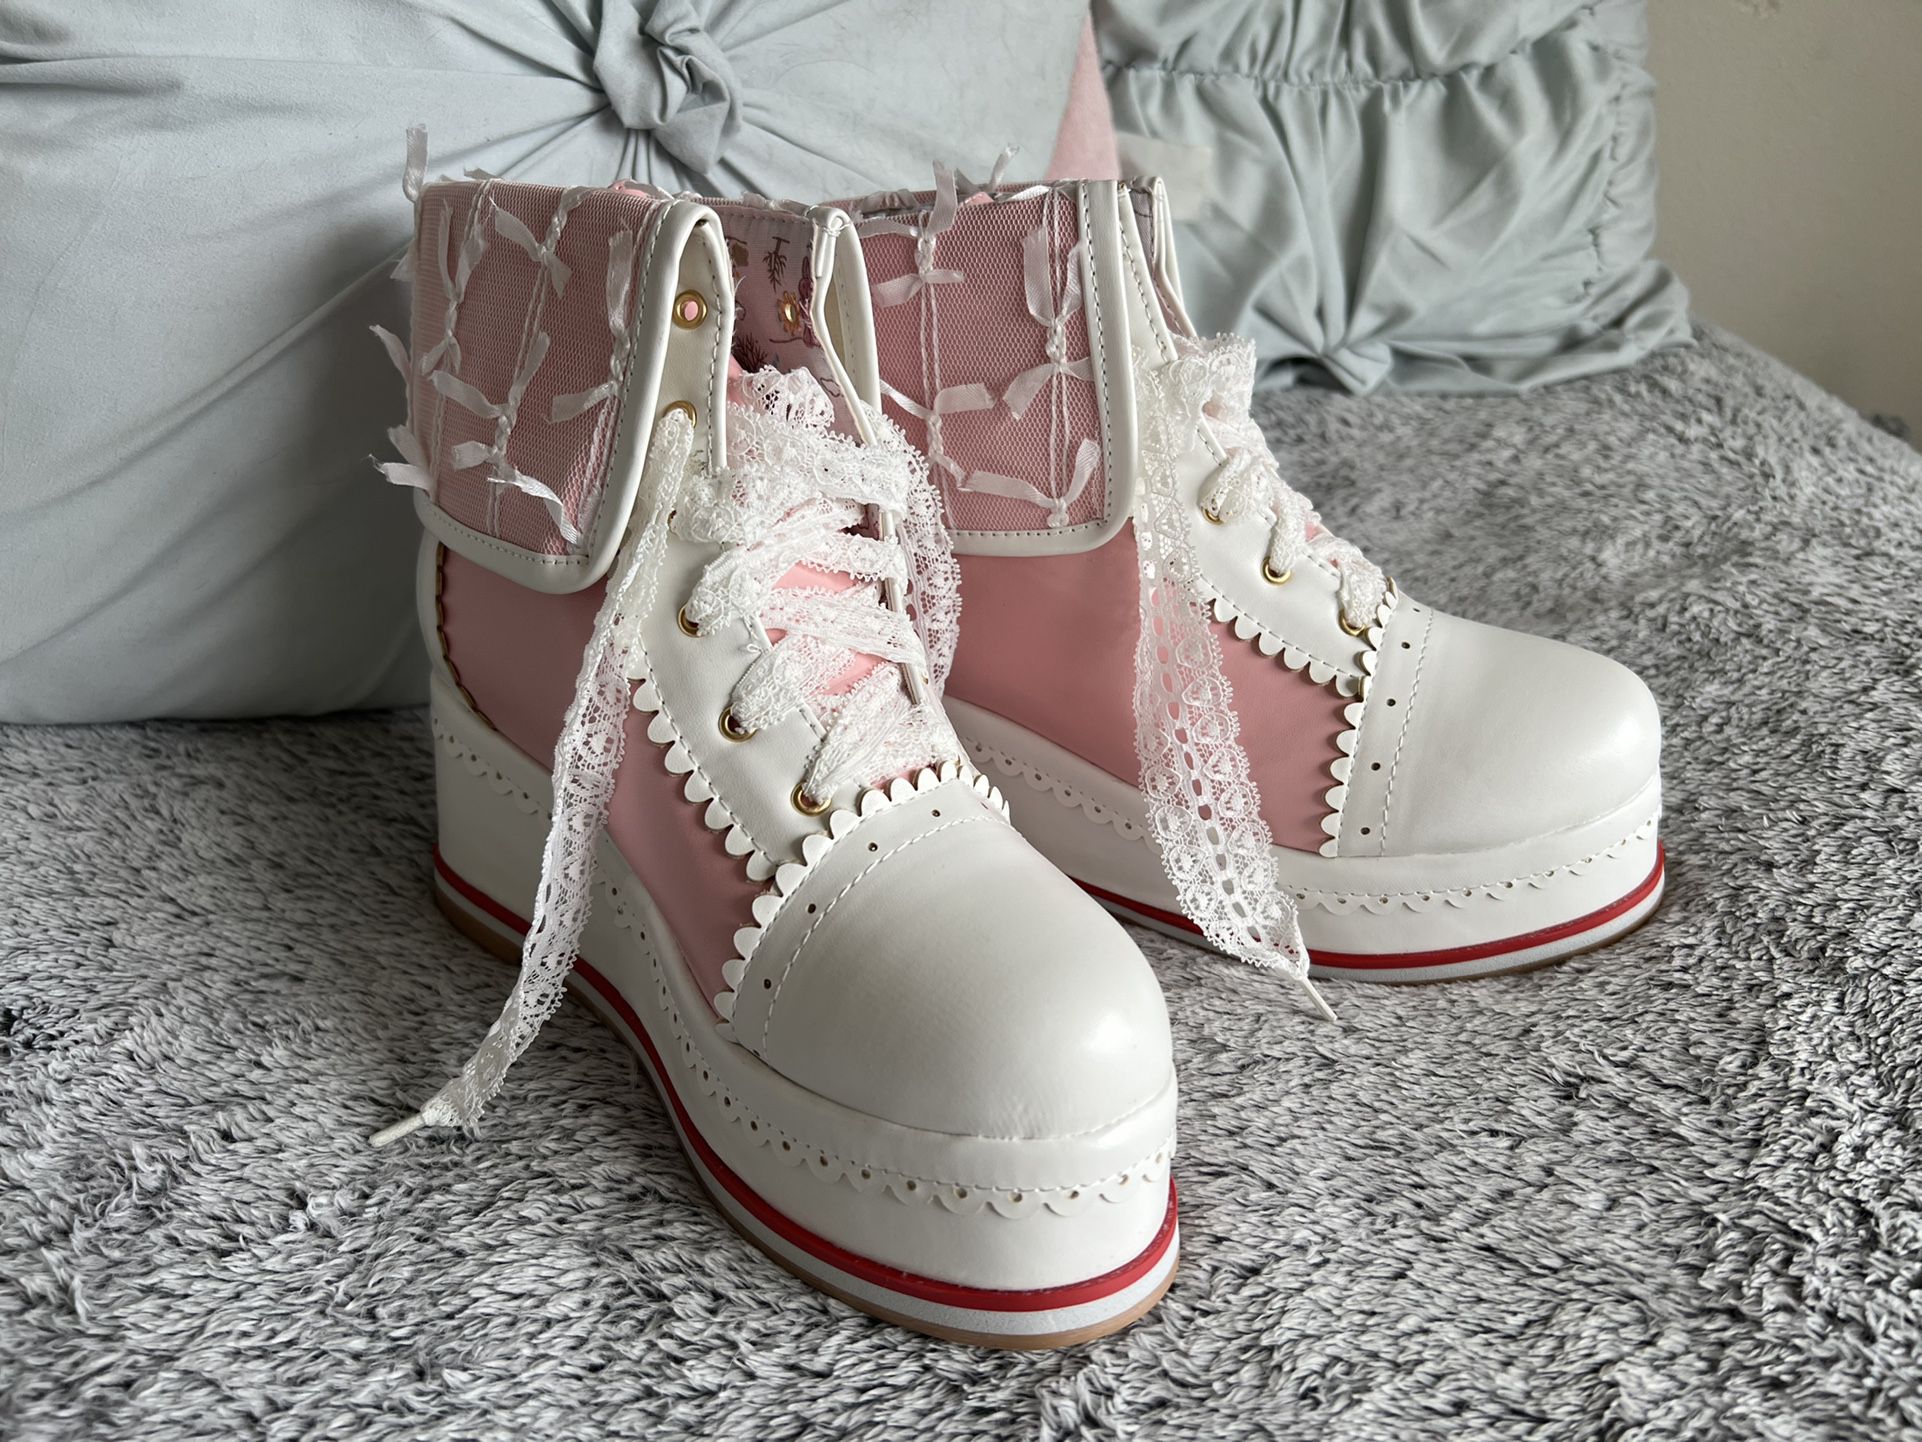 NEW NEVER USED Kawaii Platform Women’s Sneaker Boots Lace Lolita Victorian Pink Cute Japanese *SEE DESCRIPTION*